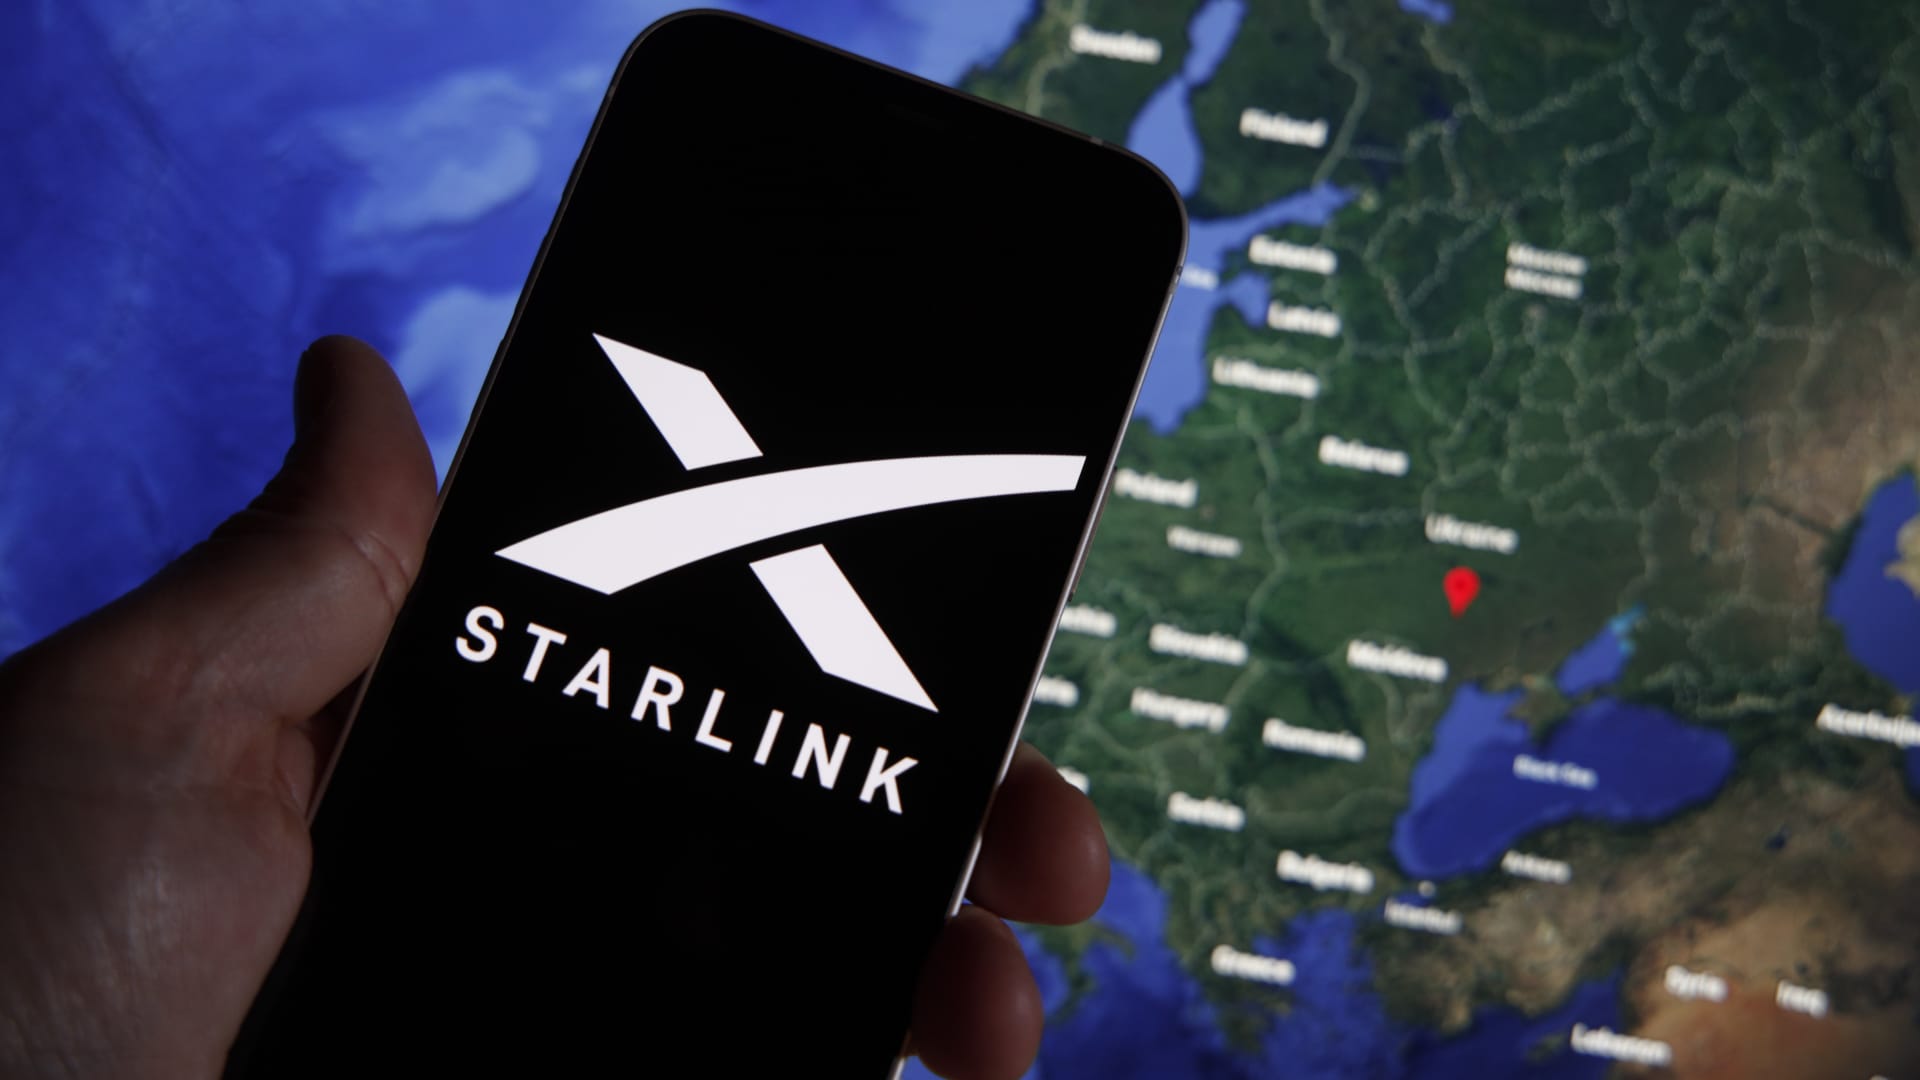 House Democrats probe SpaceX over alleged illegal export and use of Starlink by Russia